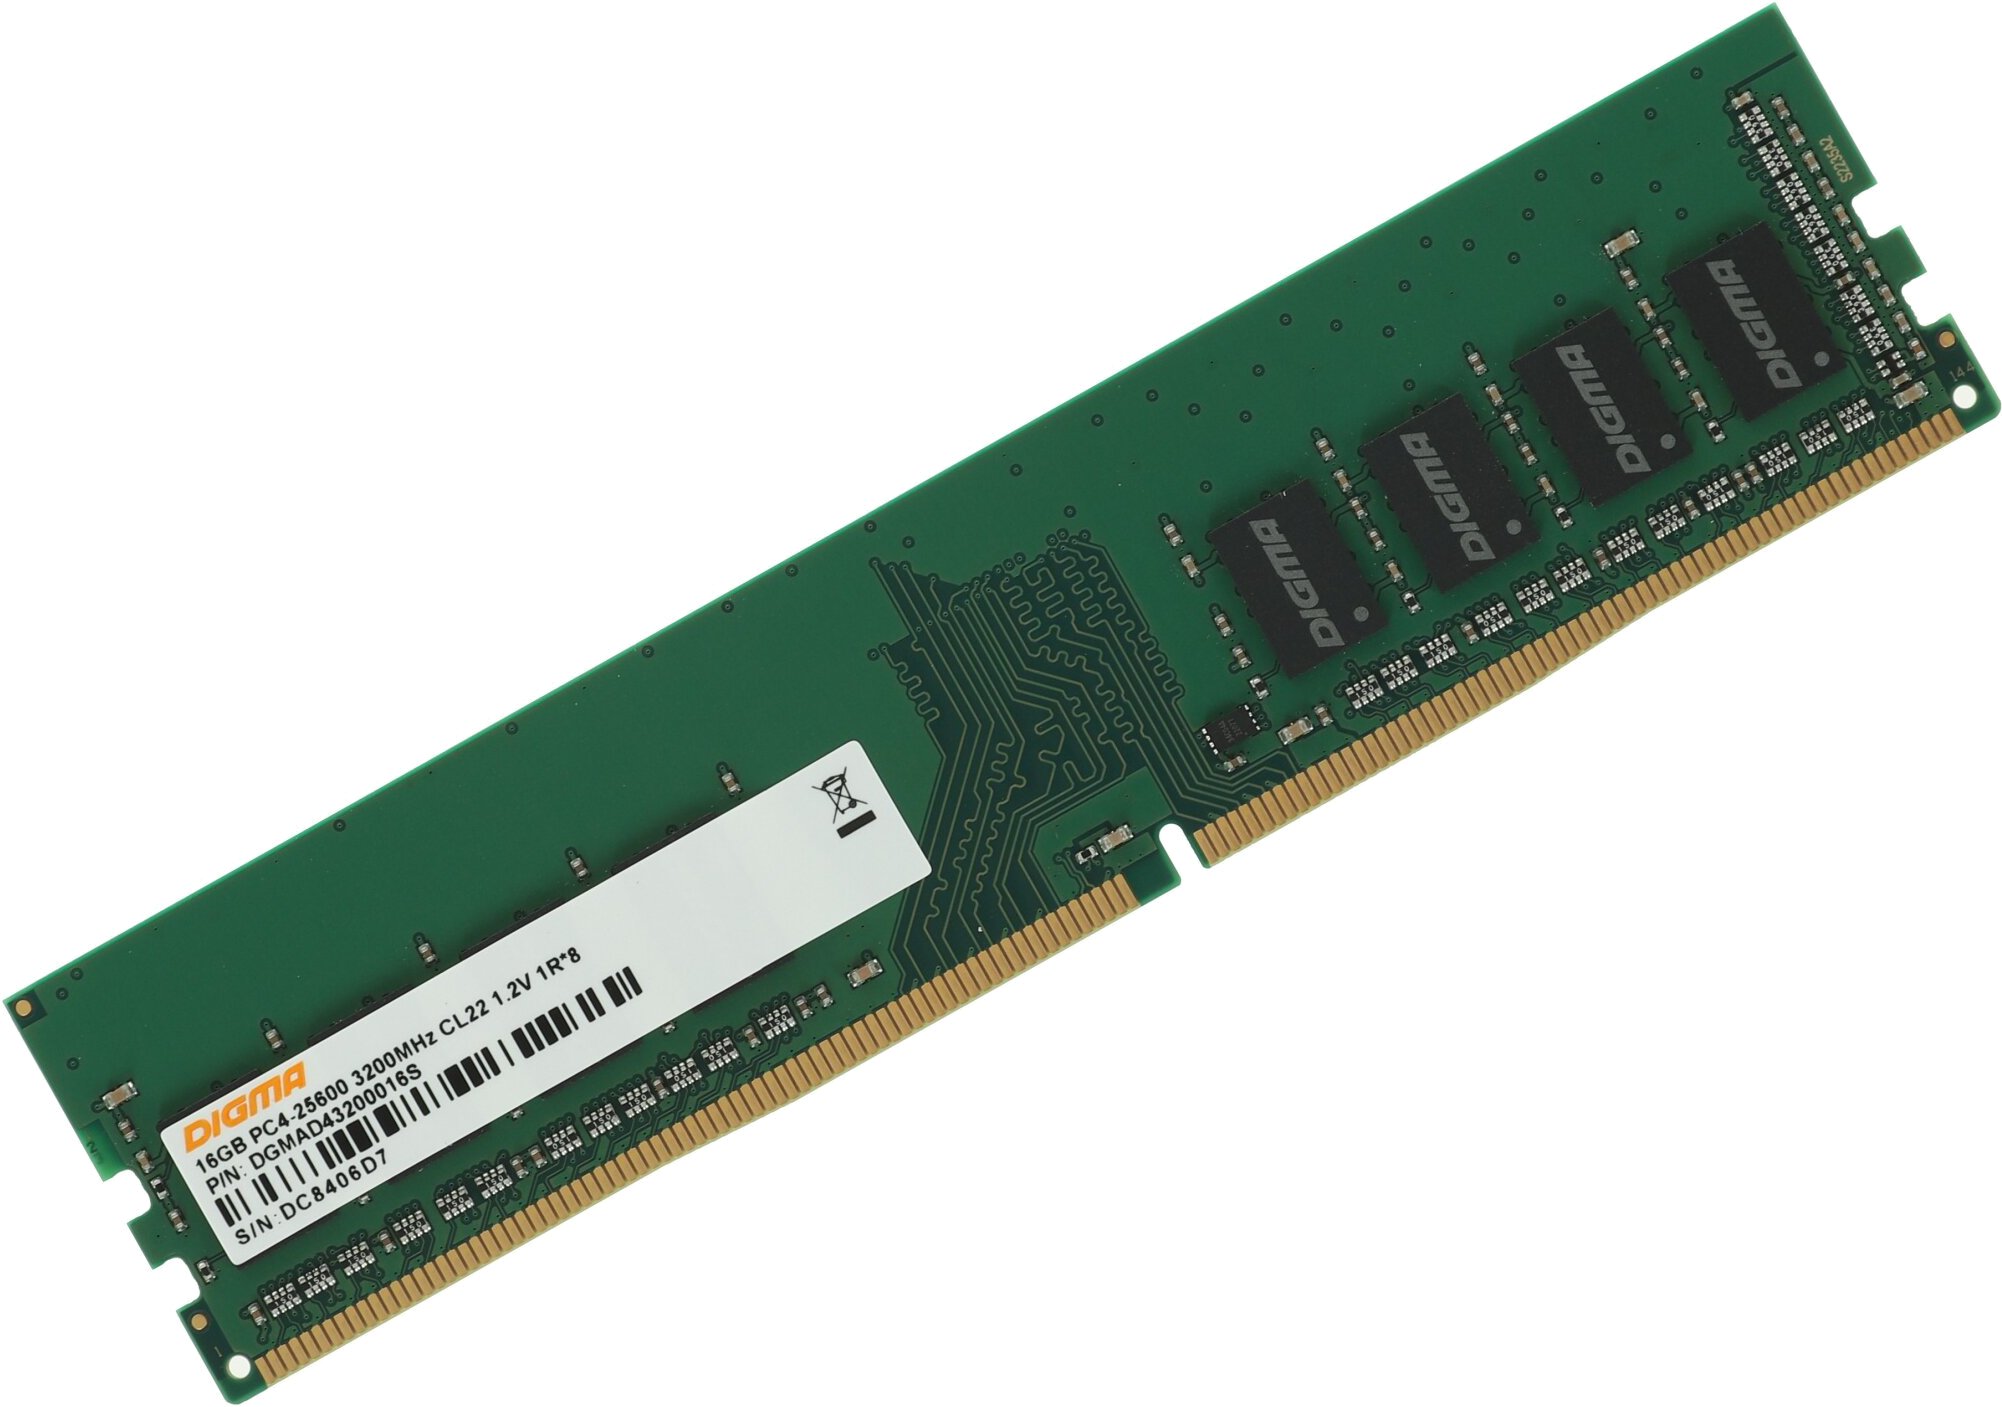  Digma 16 DDR4 2666 DIMM CL19 single rank, Ret (DGMAD42666016S) ()